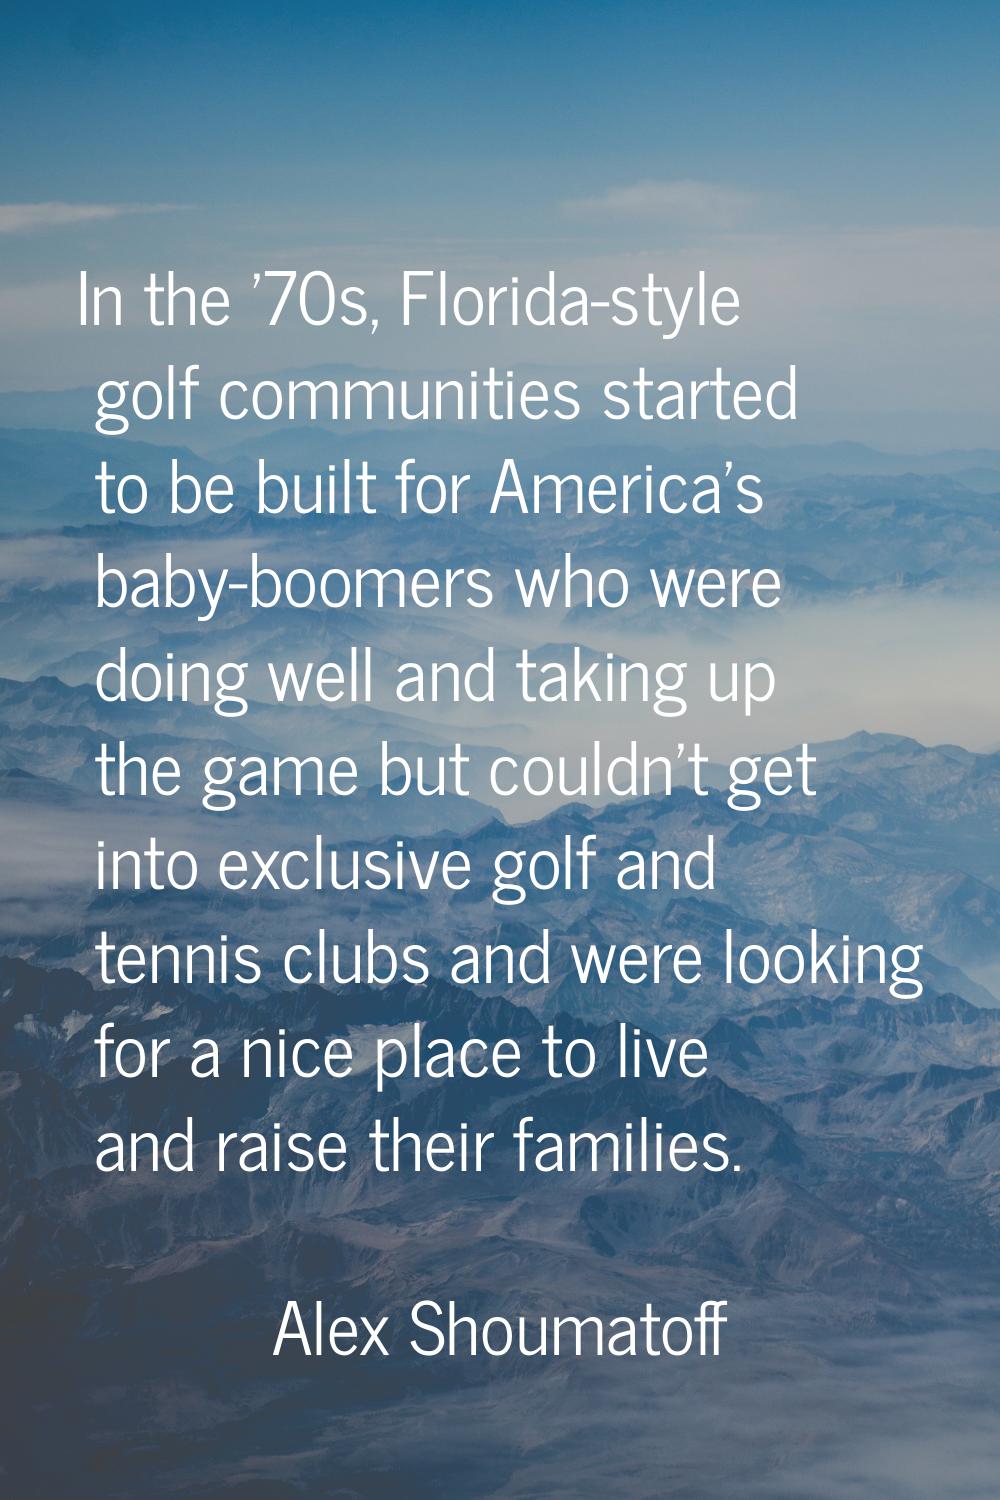 In the '70s, Florida-style golf communities started to be built for America's baby-boomers who were